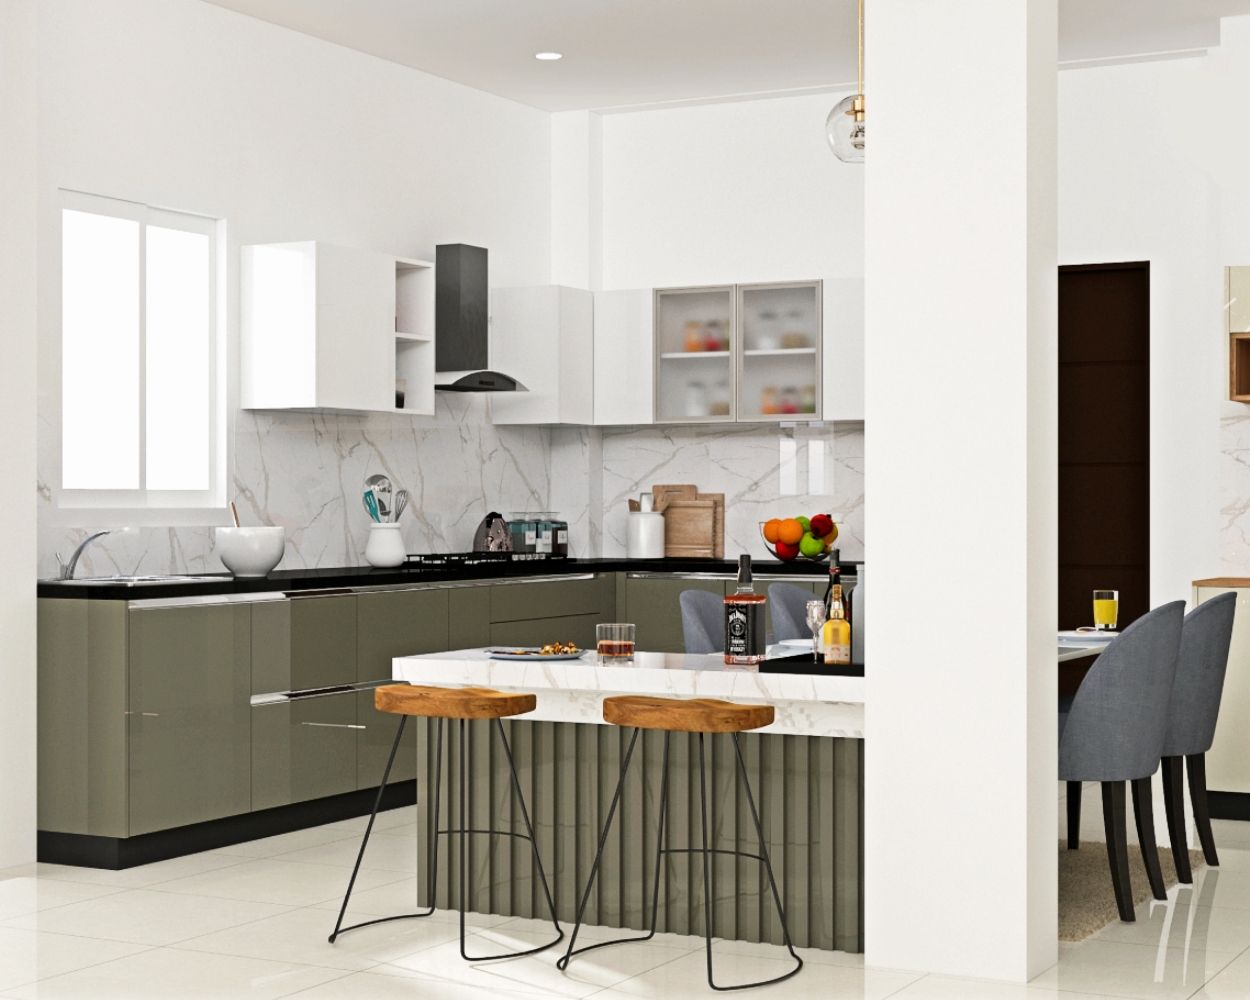 Contemporary Modular Open Kitchen Design With High-Gloss Green And White Cabinets